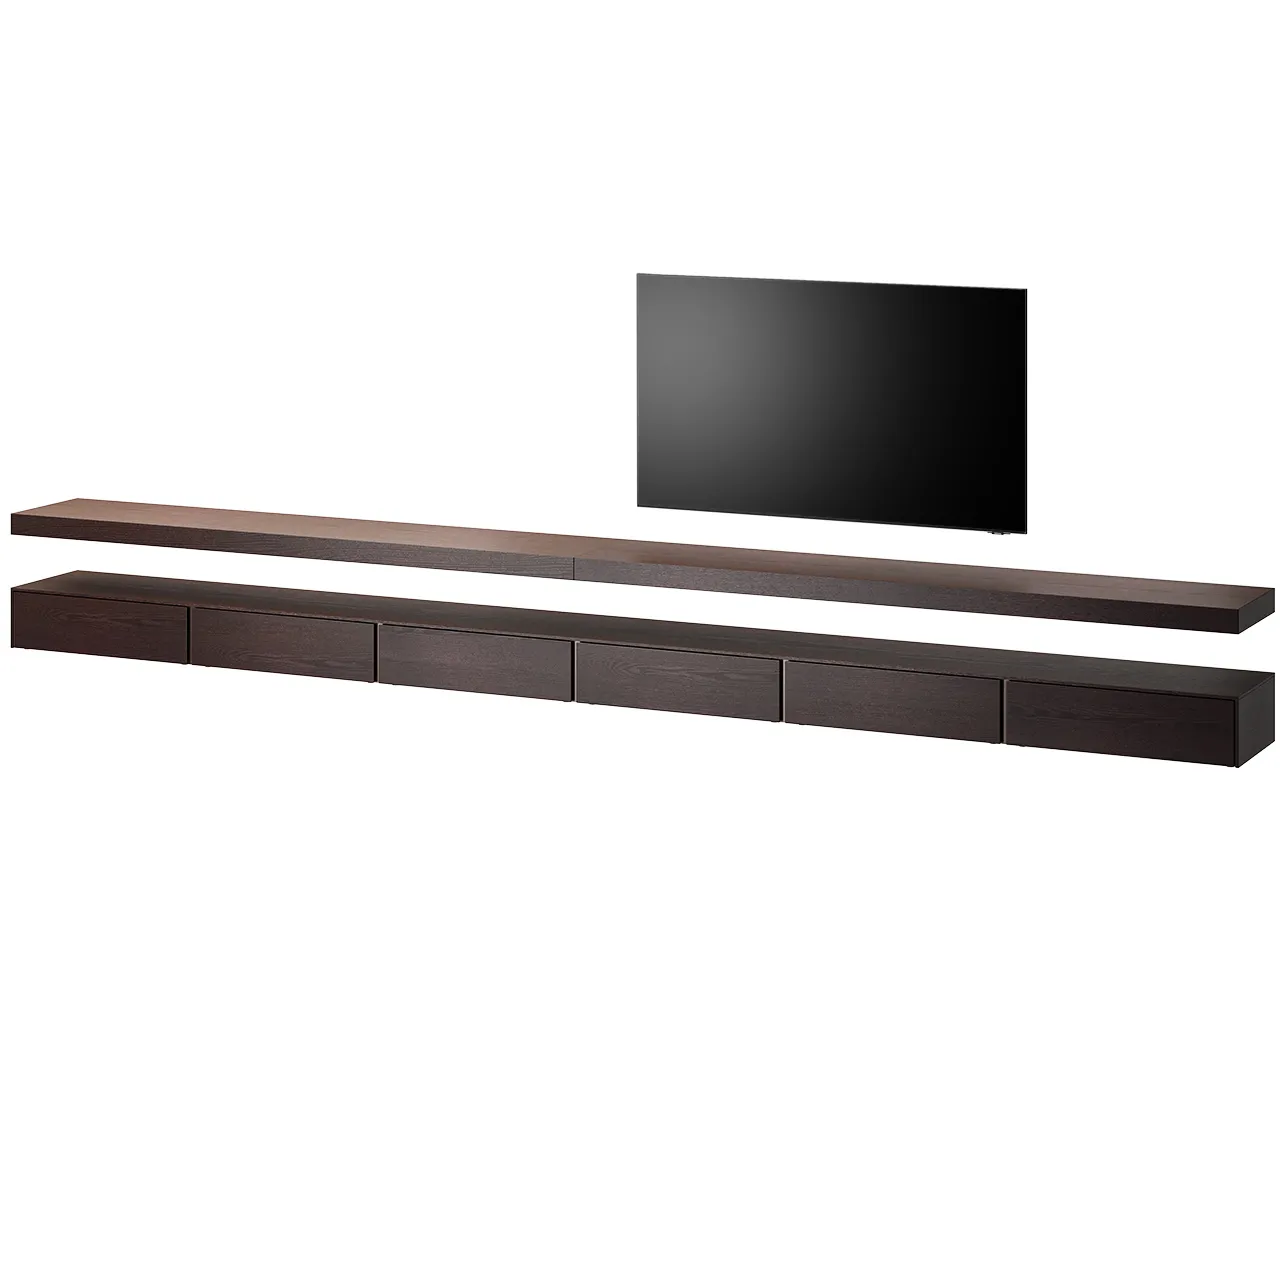 Furniture – avenue-tv-stand-540-l-by-md-house